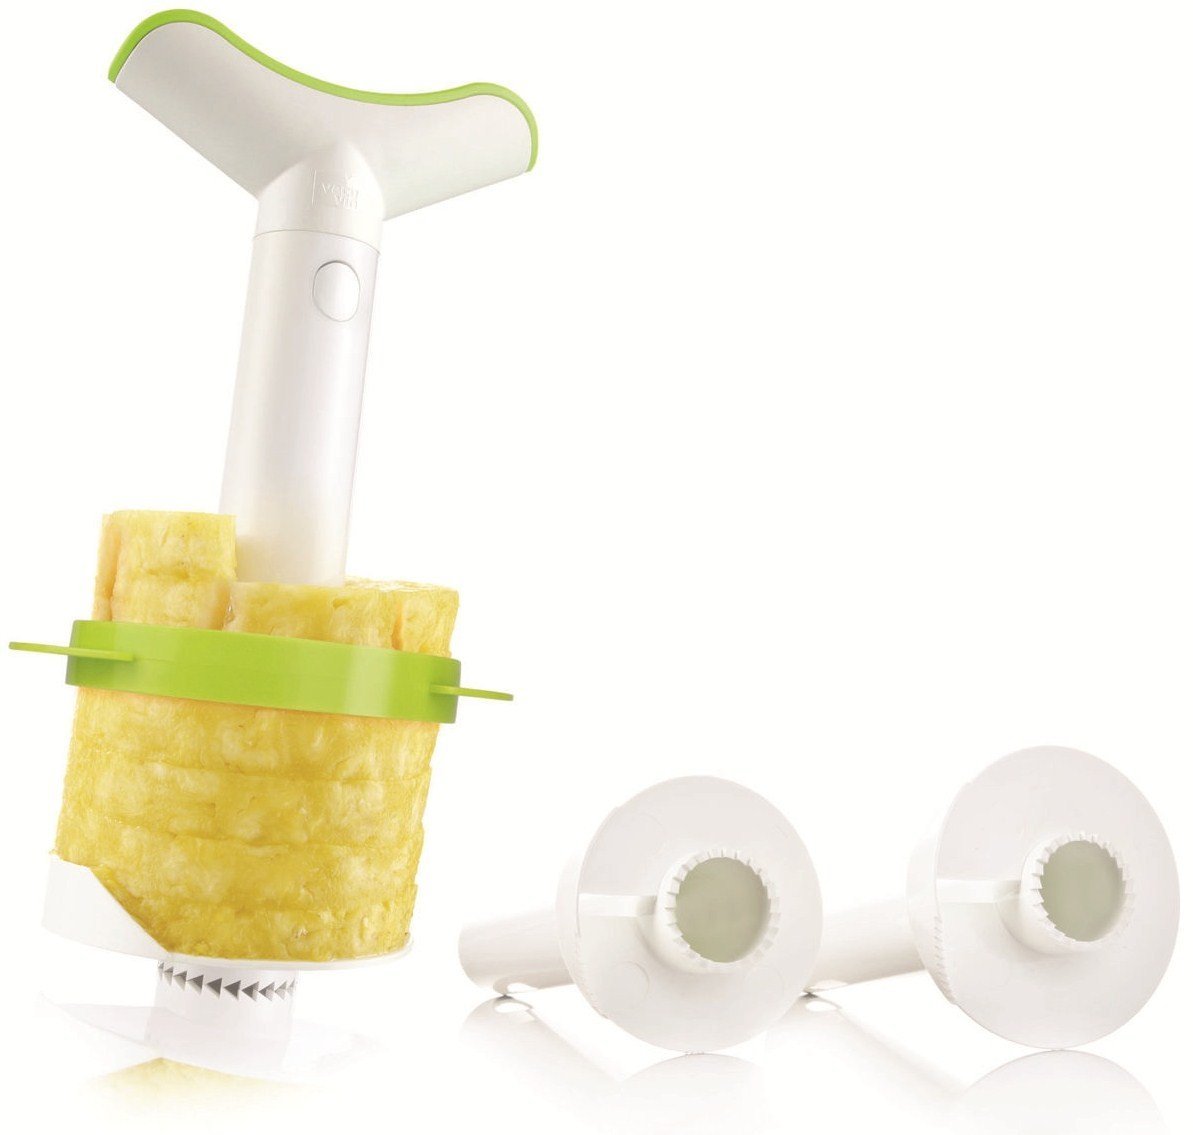 48702606 Pineapple Slicer With Green Wedger & 3 Knives, Small, Medium & Large - Gift Box